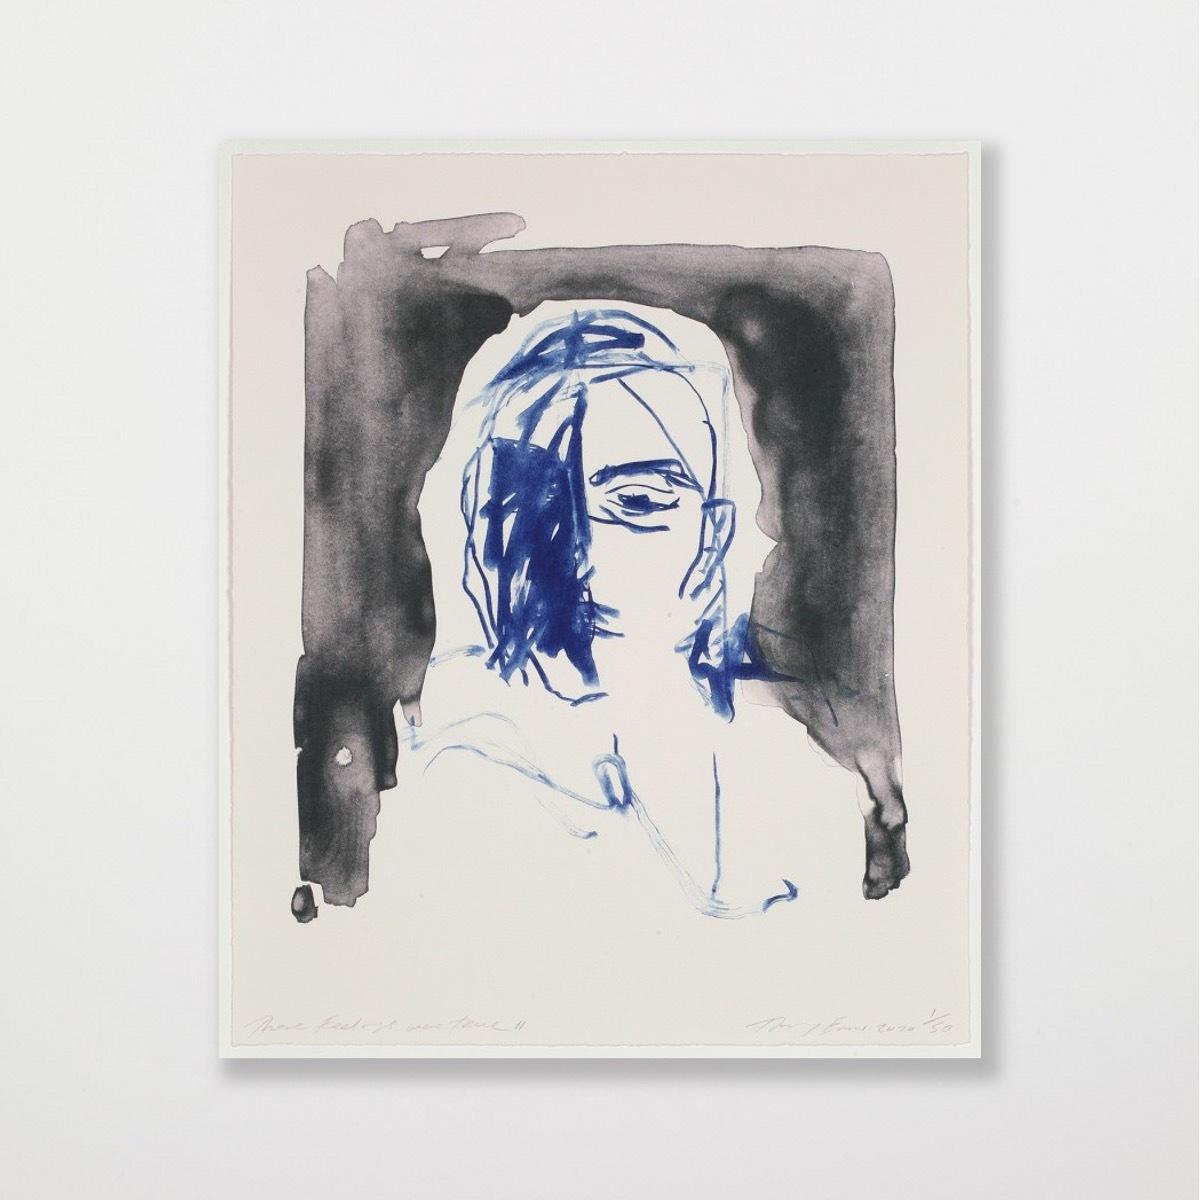 These Feelings Were True II- Emin, Contemporary, YBAs, Lithograph
2 colour lithograph on Somerset Velvet Warm White 400gsm
Edition of 50
65,5 x 55,5 cm (25.8 x 21.9 in)
Signed, numbered, and dated by the artist
In mint condition
With certificate of